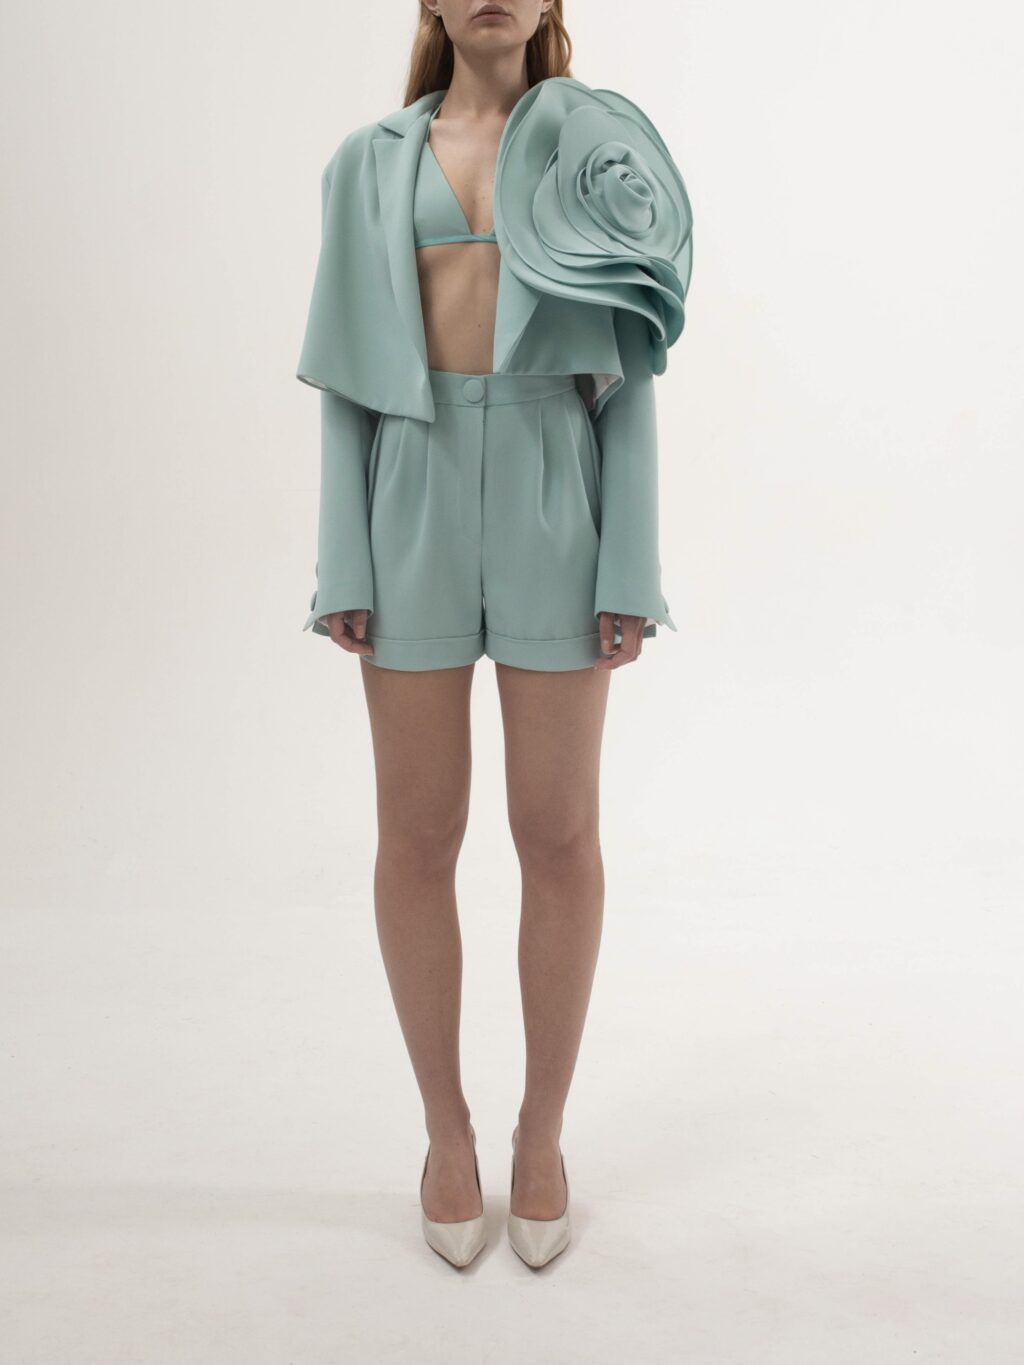 Cropped Jacket With Flower Detail in Mint